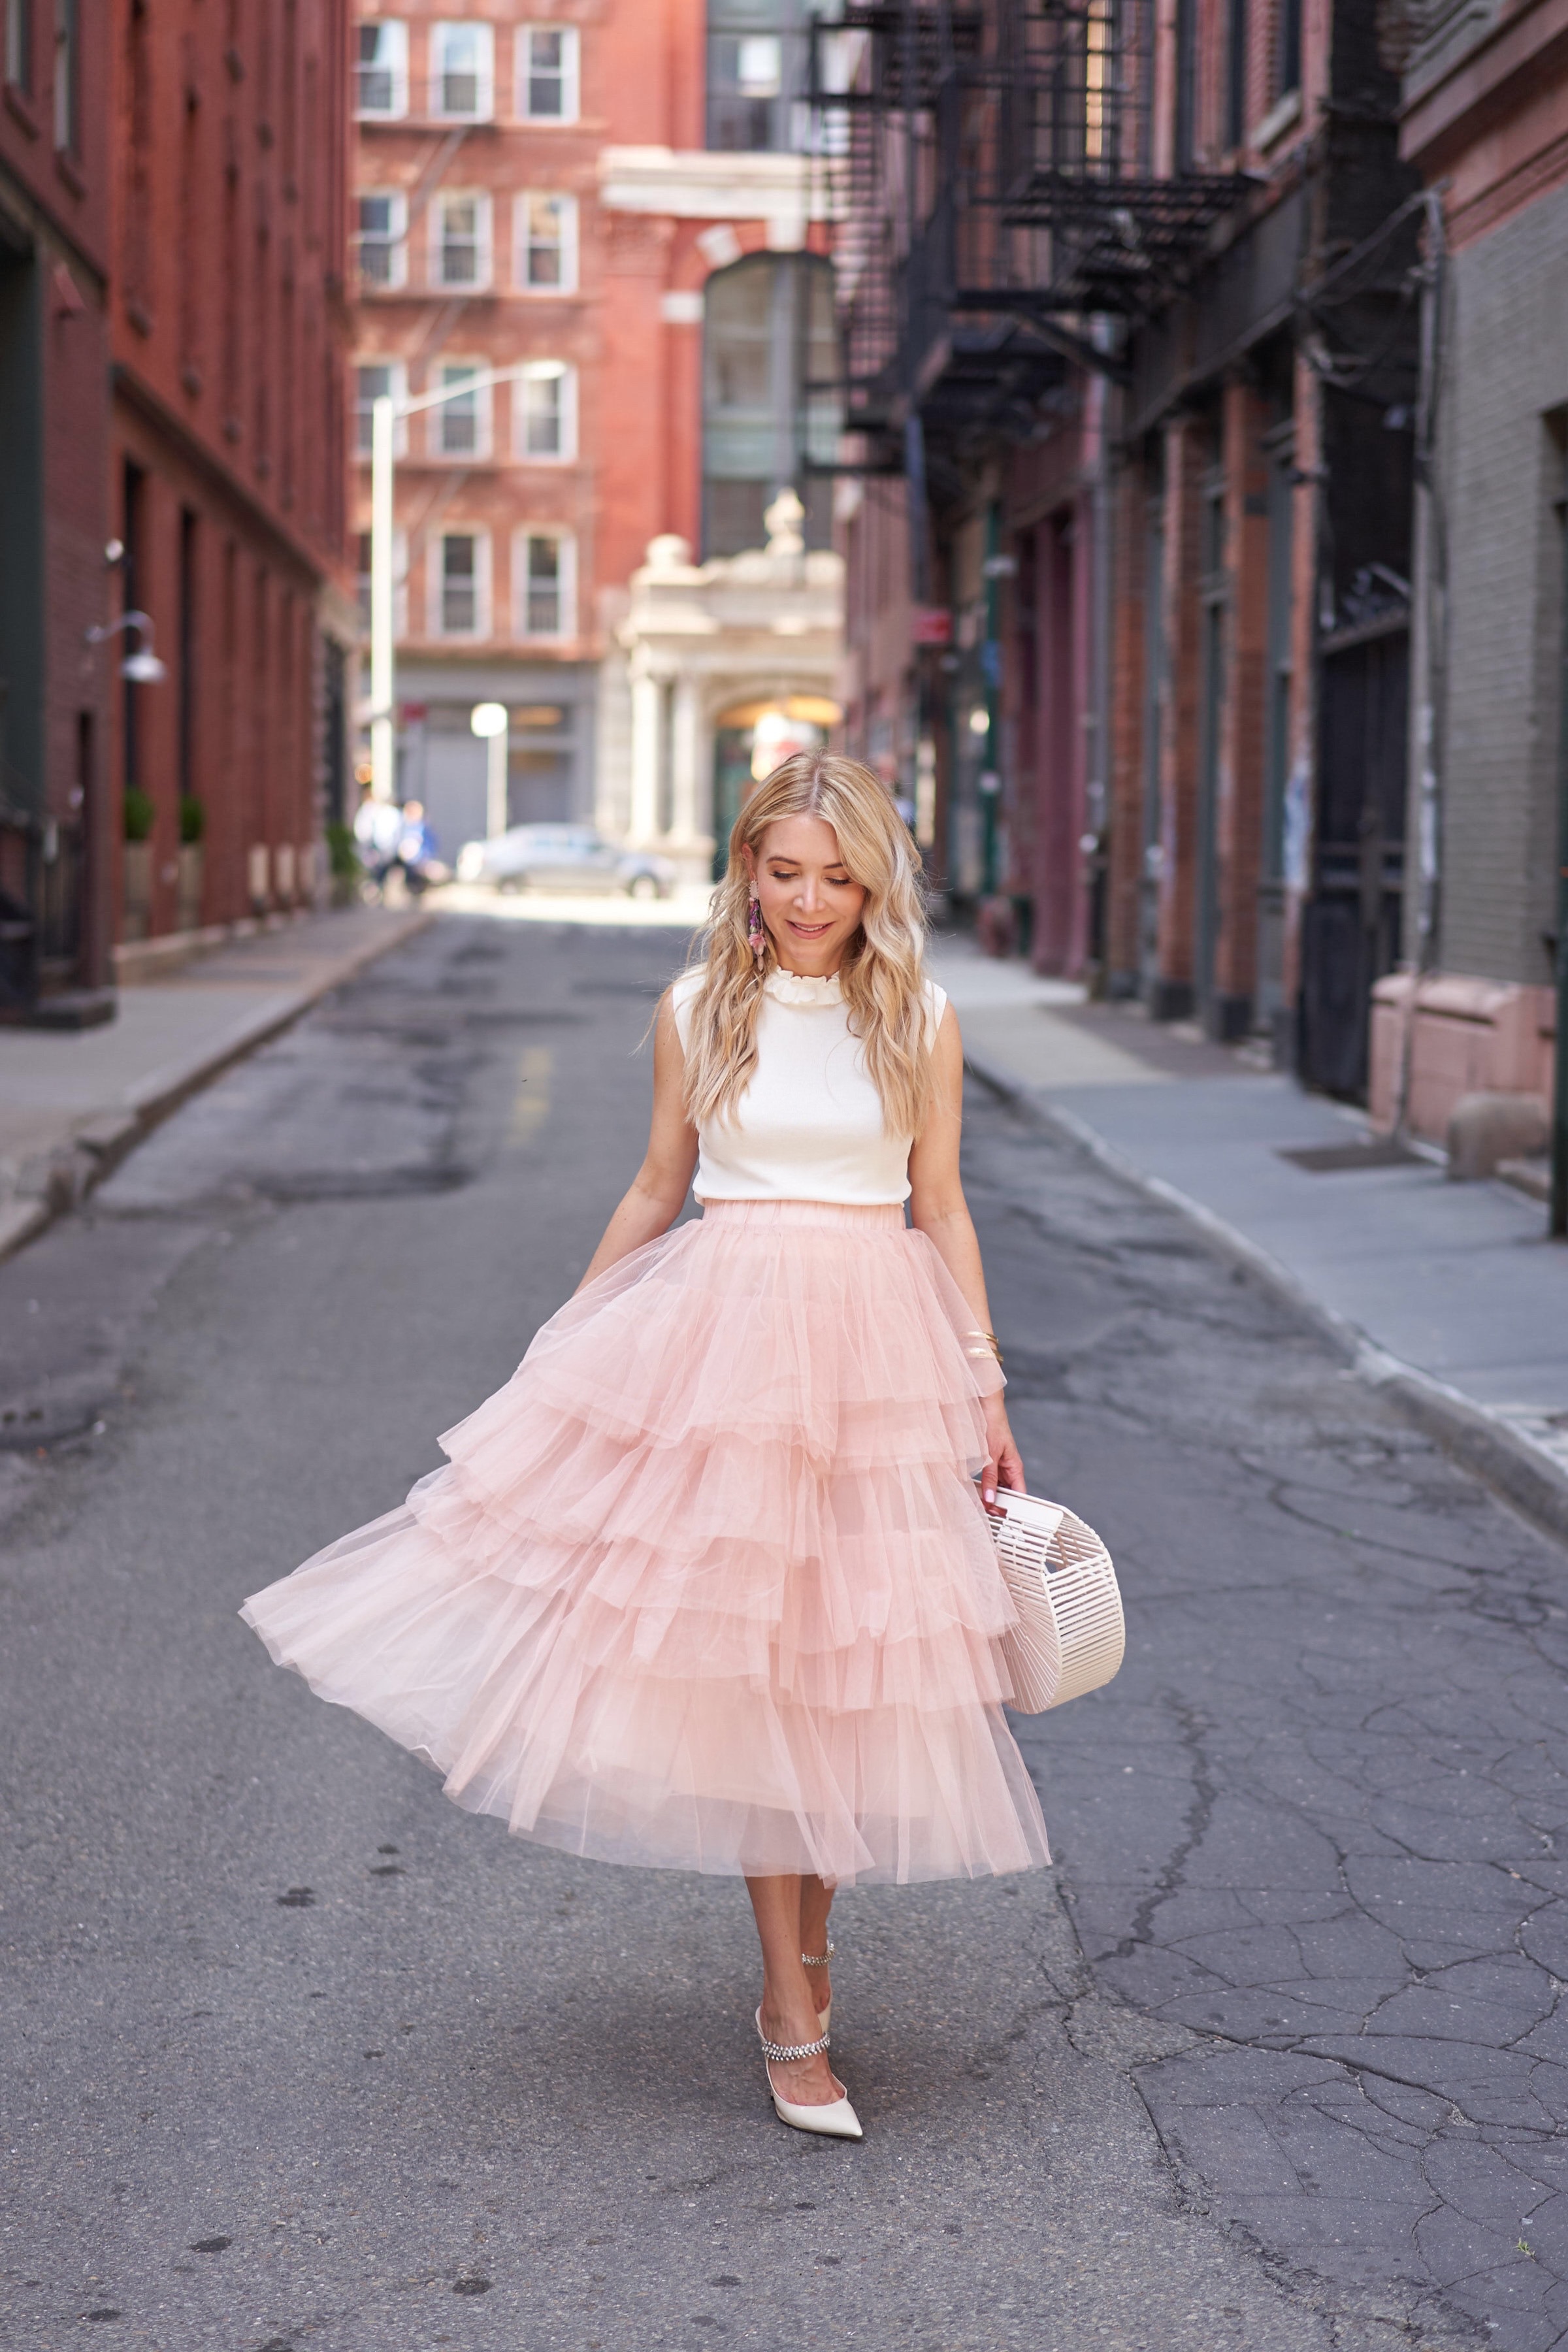 Two Tulle Skirt Looks From Chicwish!